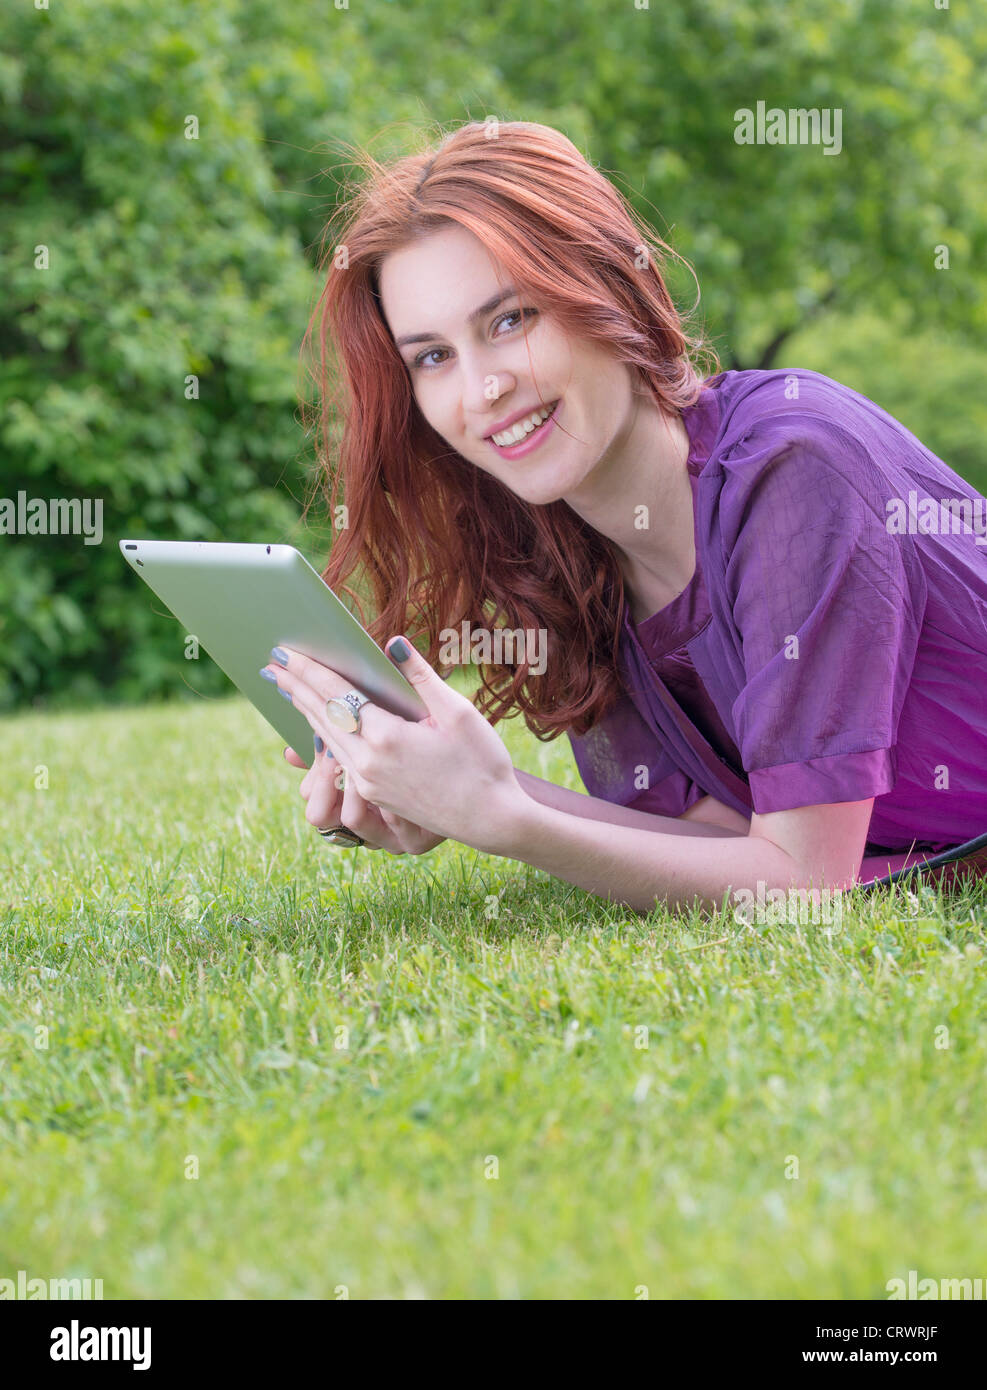 Happy young female adult with red hair lying on a lawn holding a tablet pc Stock Photo